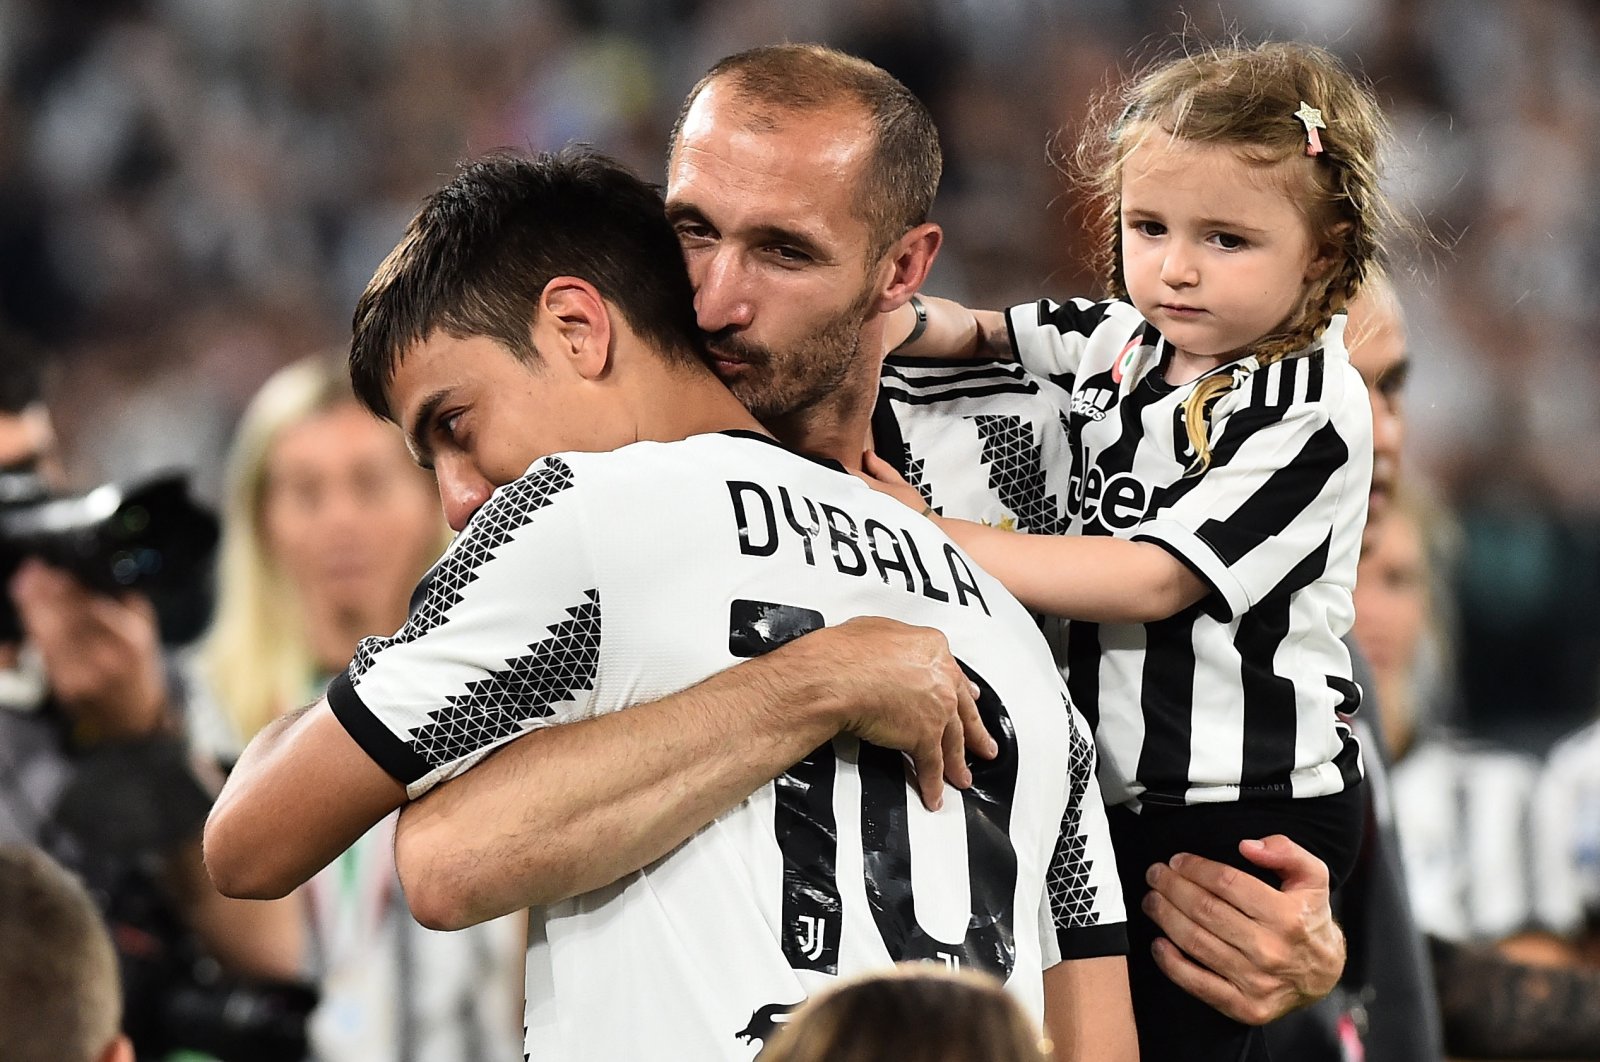 Juventus&#039; Giorgio Chiellini and Paulo Dybala react after a Serie A match against Lazio, Turin, Italy, May 16, 2022. (Reuters Photo)